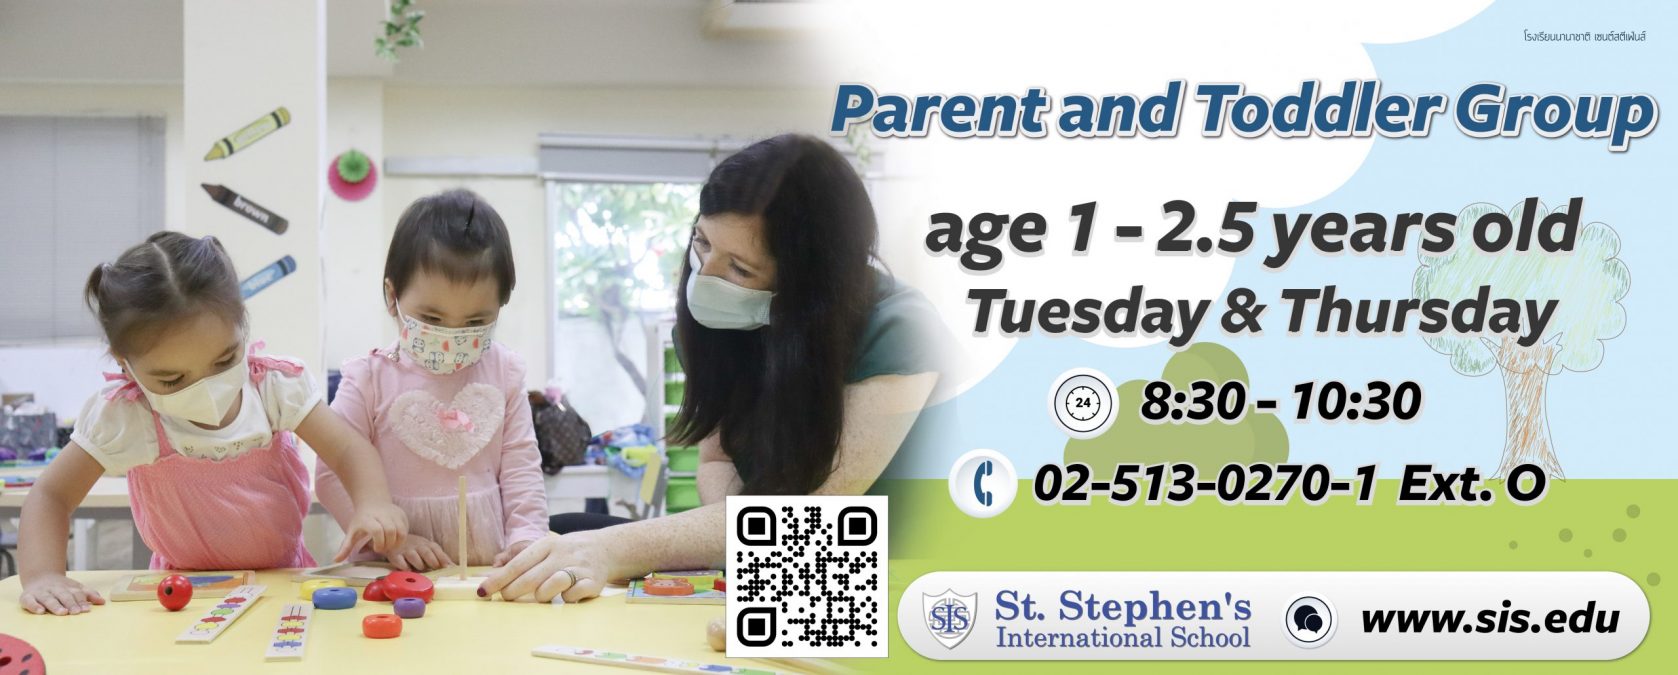 Let’s Enjoy the Little Gems Parent and Toddler Group by St.Stephen’s International School